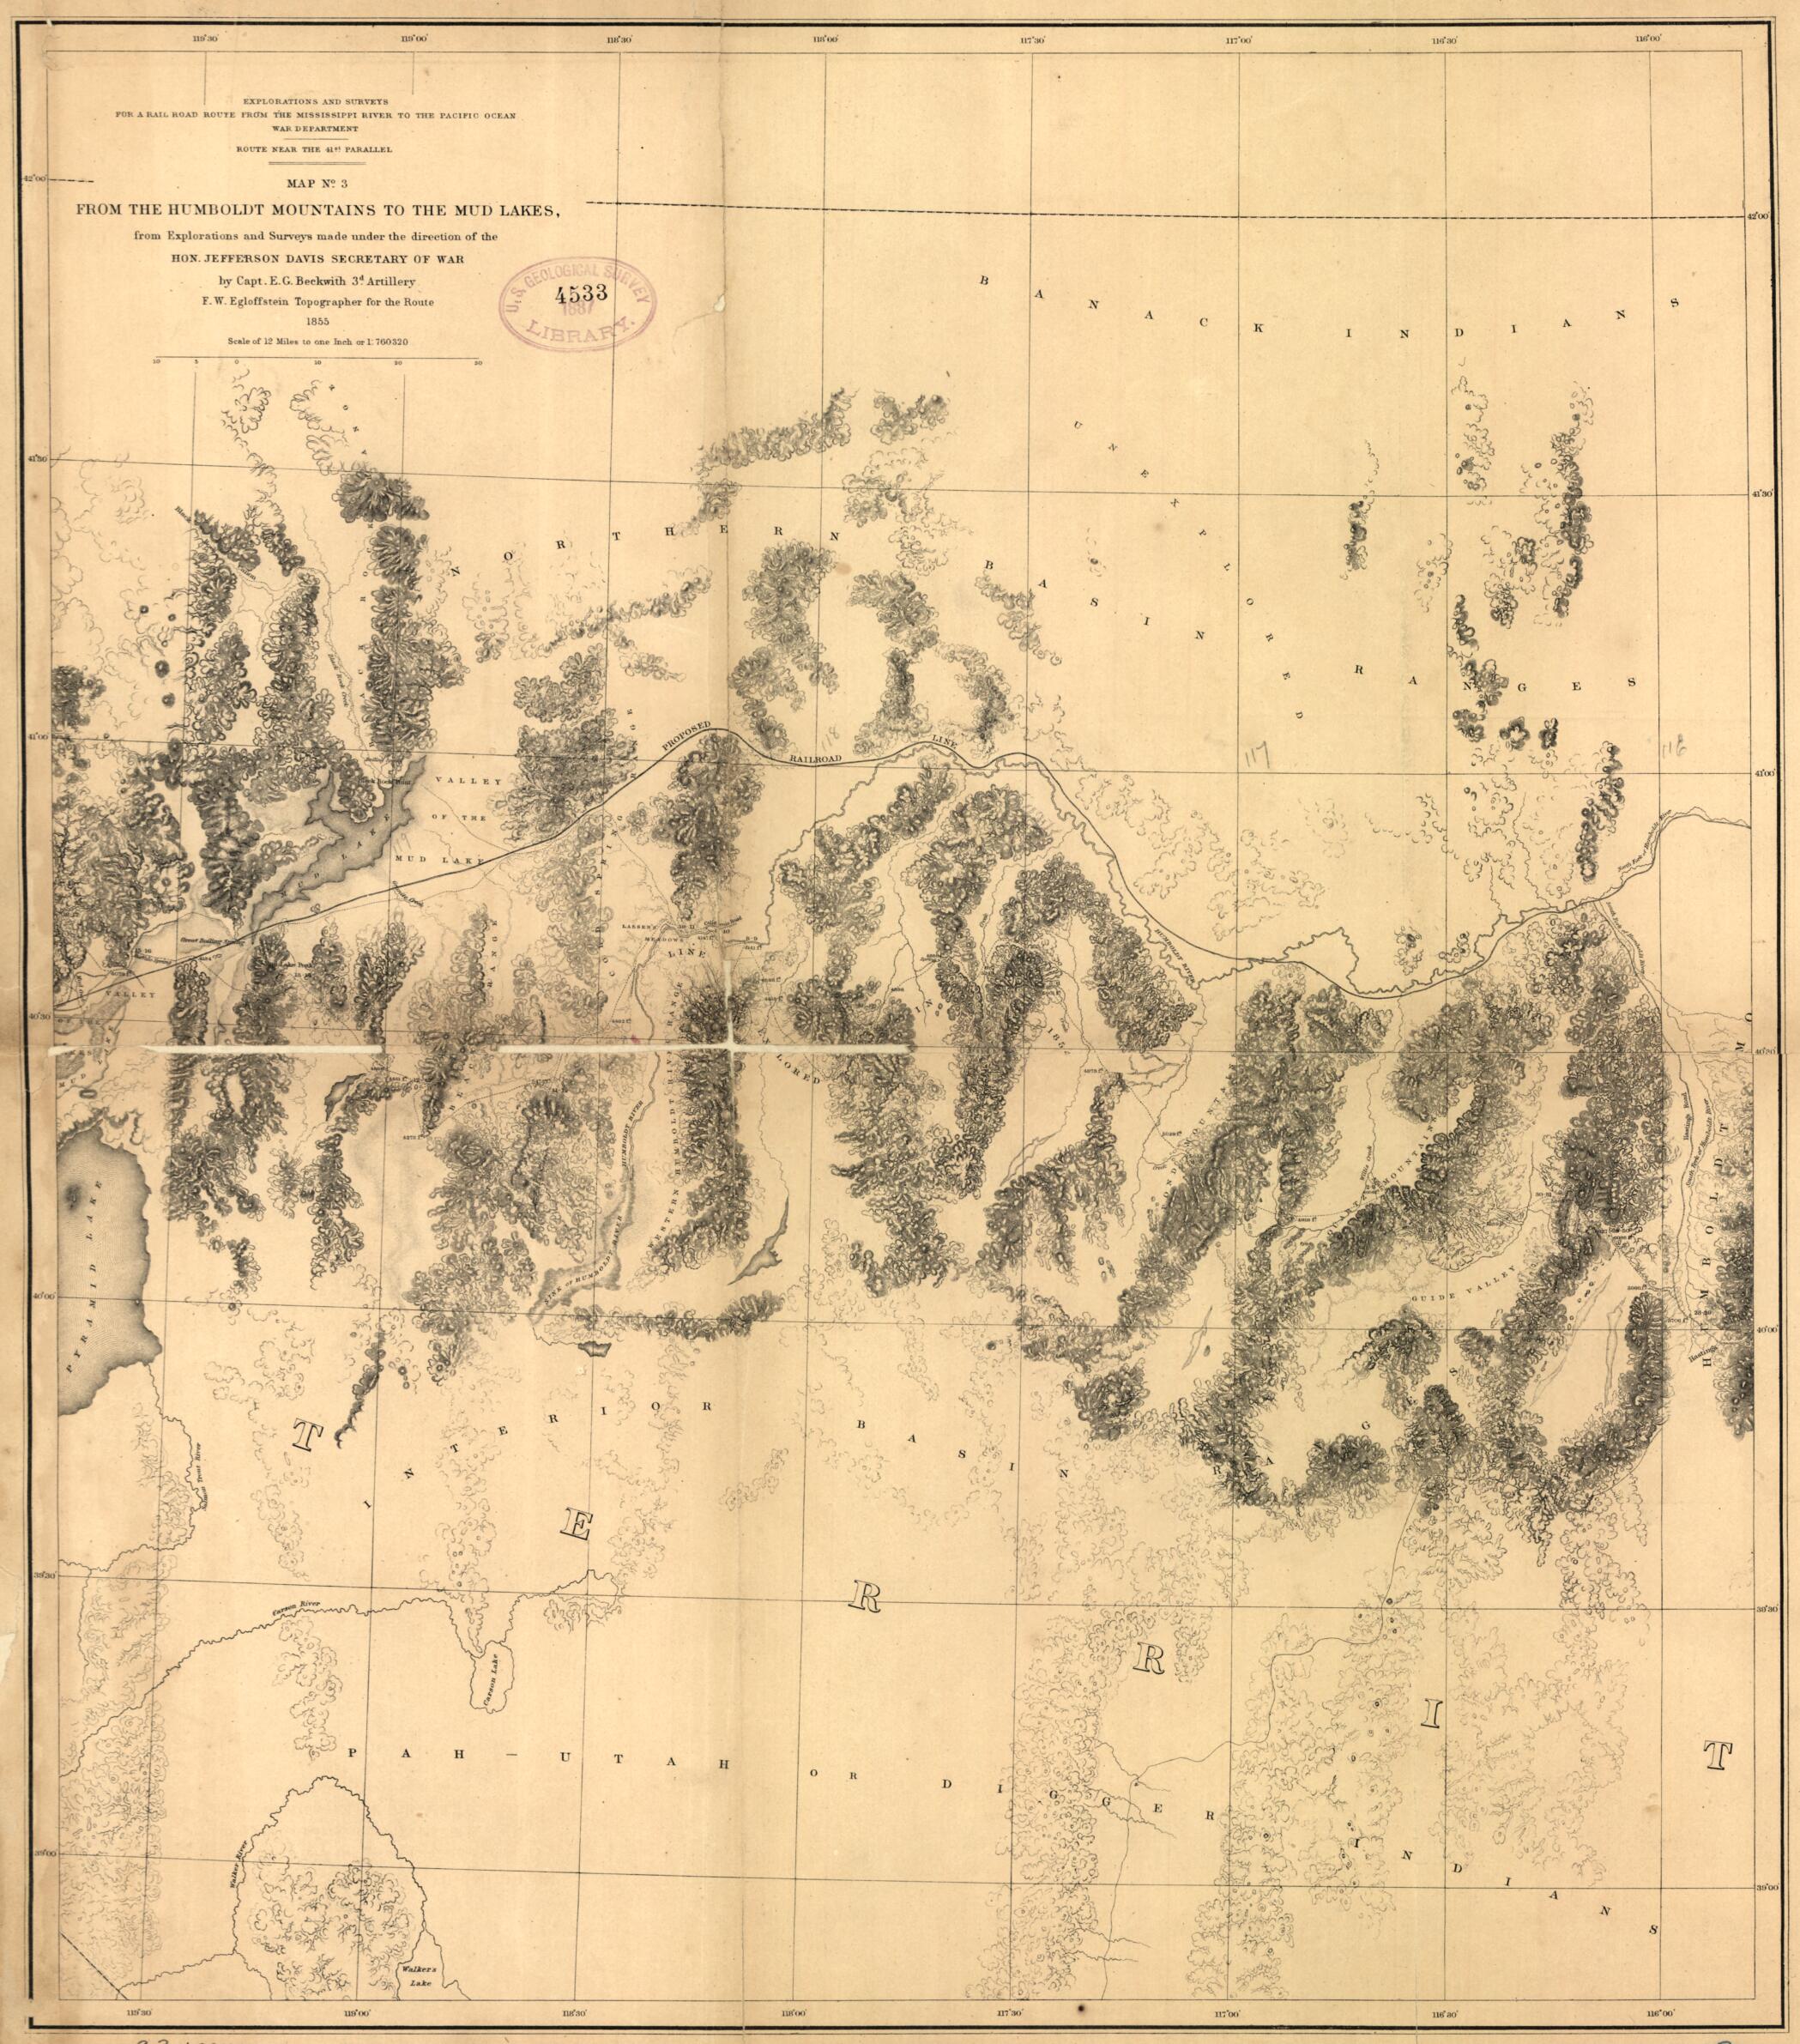 This old map of From the Humboldt Mountains to the Mud Lakes from 1855 was created by E. G. (Edward Griffin) Beckwith, Jefferson Davis, F. W. Egloffstein, Selmar Siebert,  United States. War Department in 1855